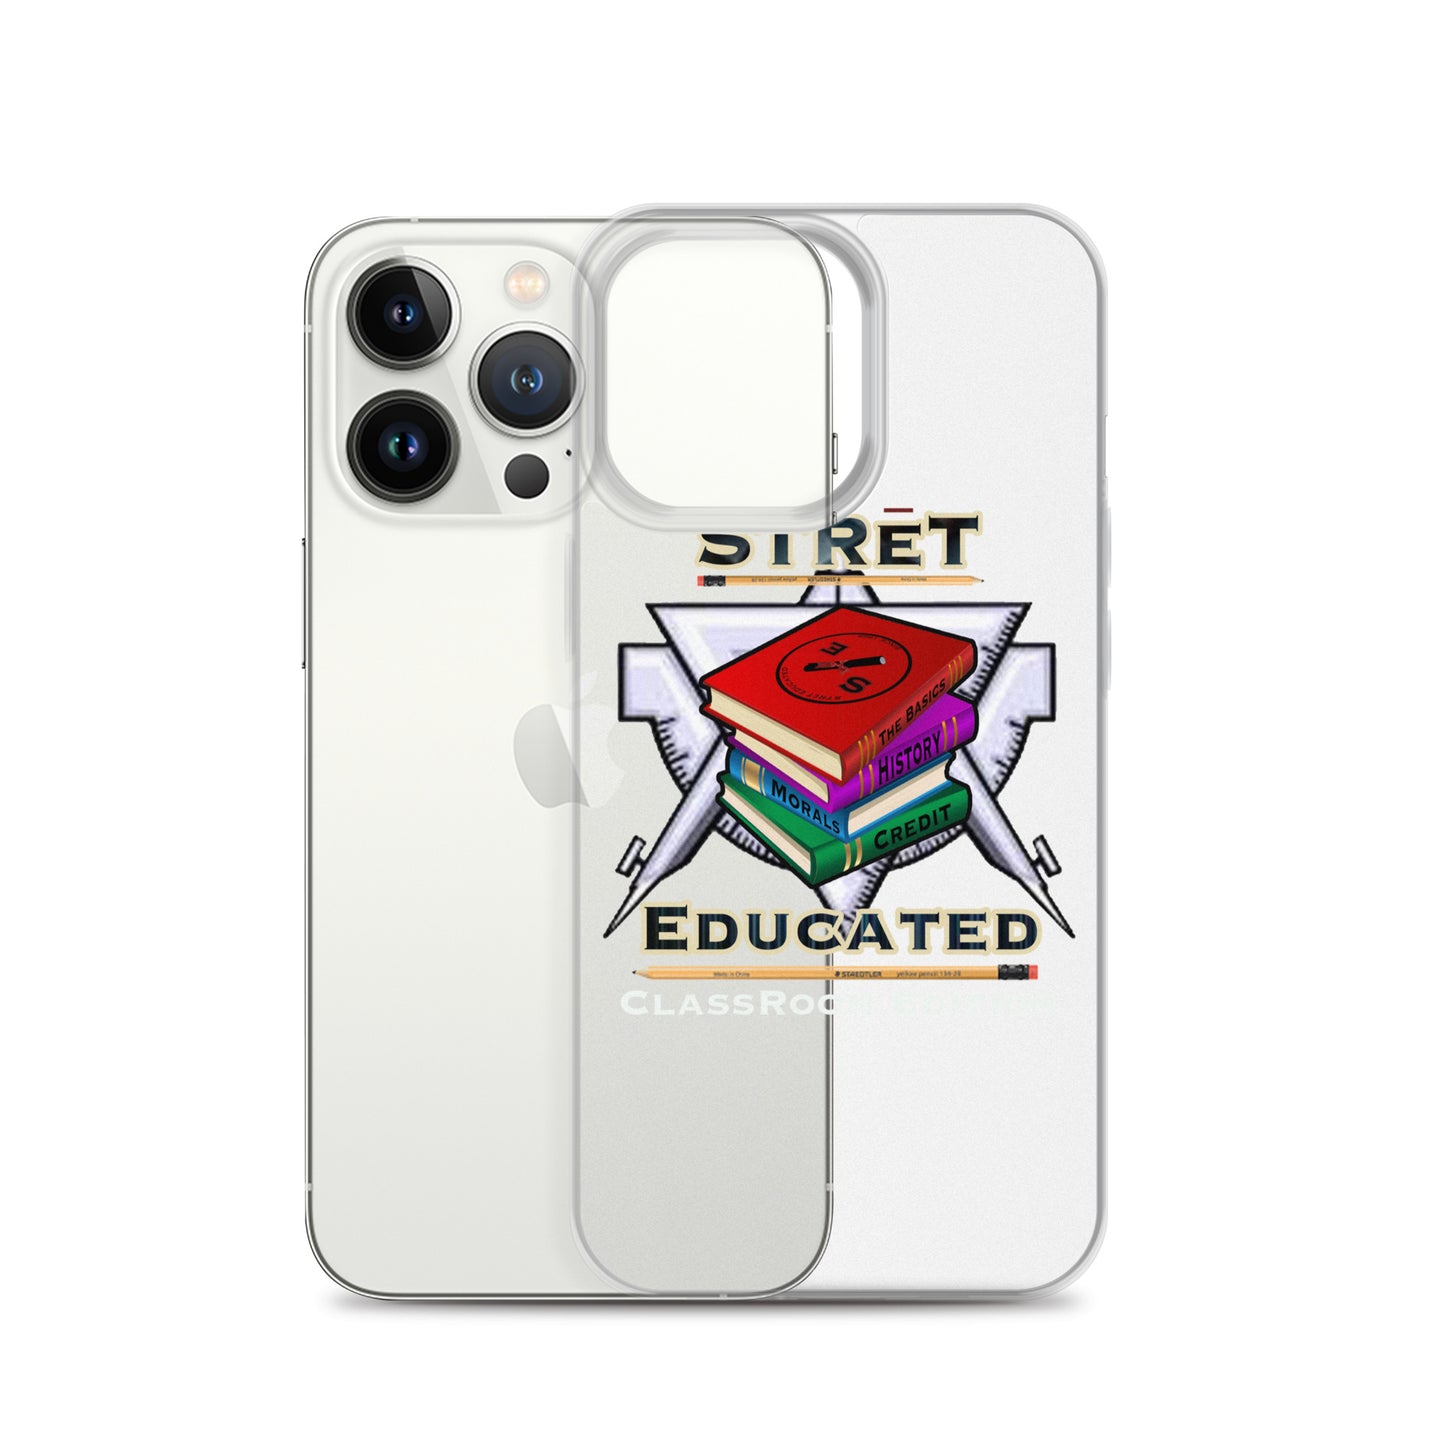 Classroom Edition iPhone Case